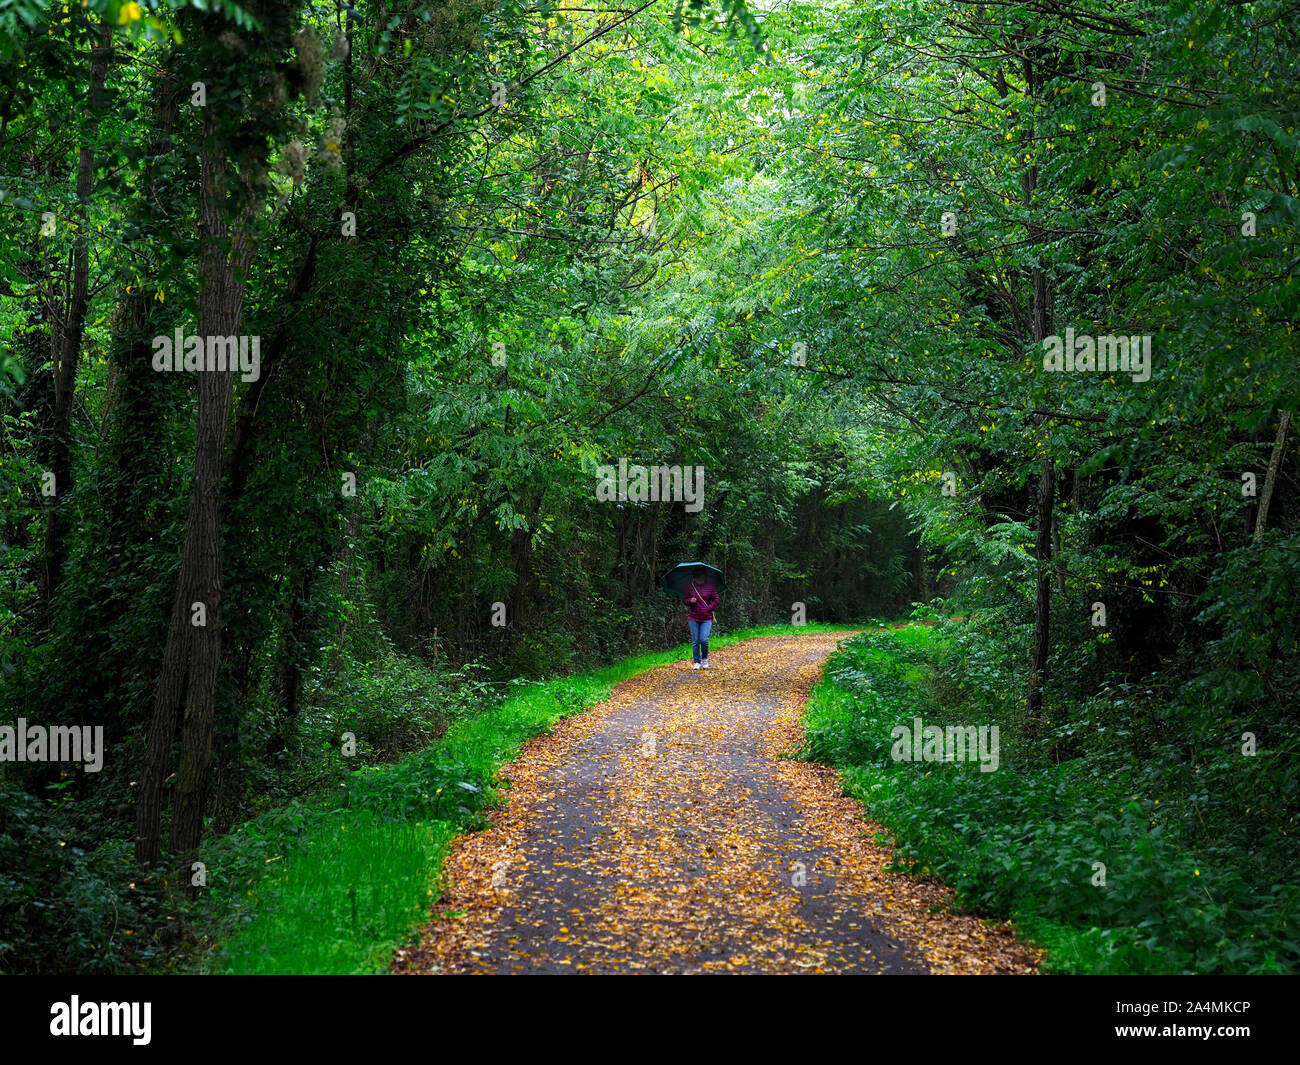 AULLA, LUNIGIANA, ITALY - OCTOBER 14, 2019: The Aulla Greenway is a cycle and pedestrian path making use of the old railway line. Escape into nature. Stock Photo